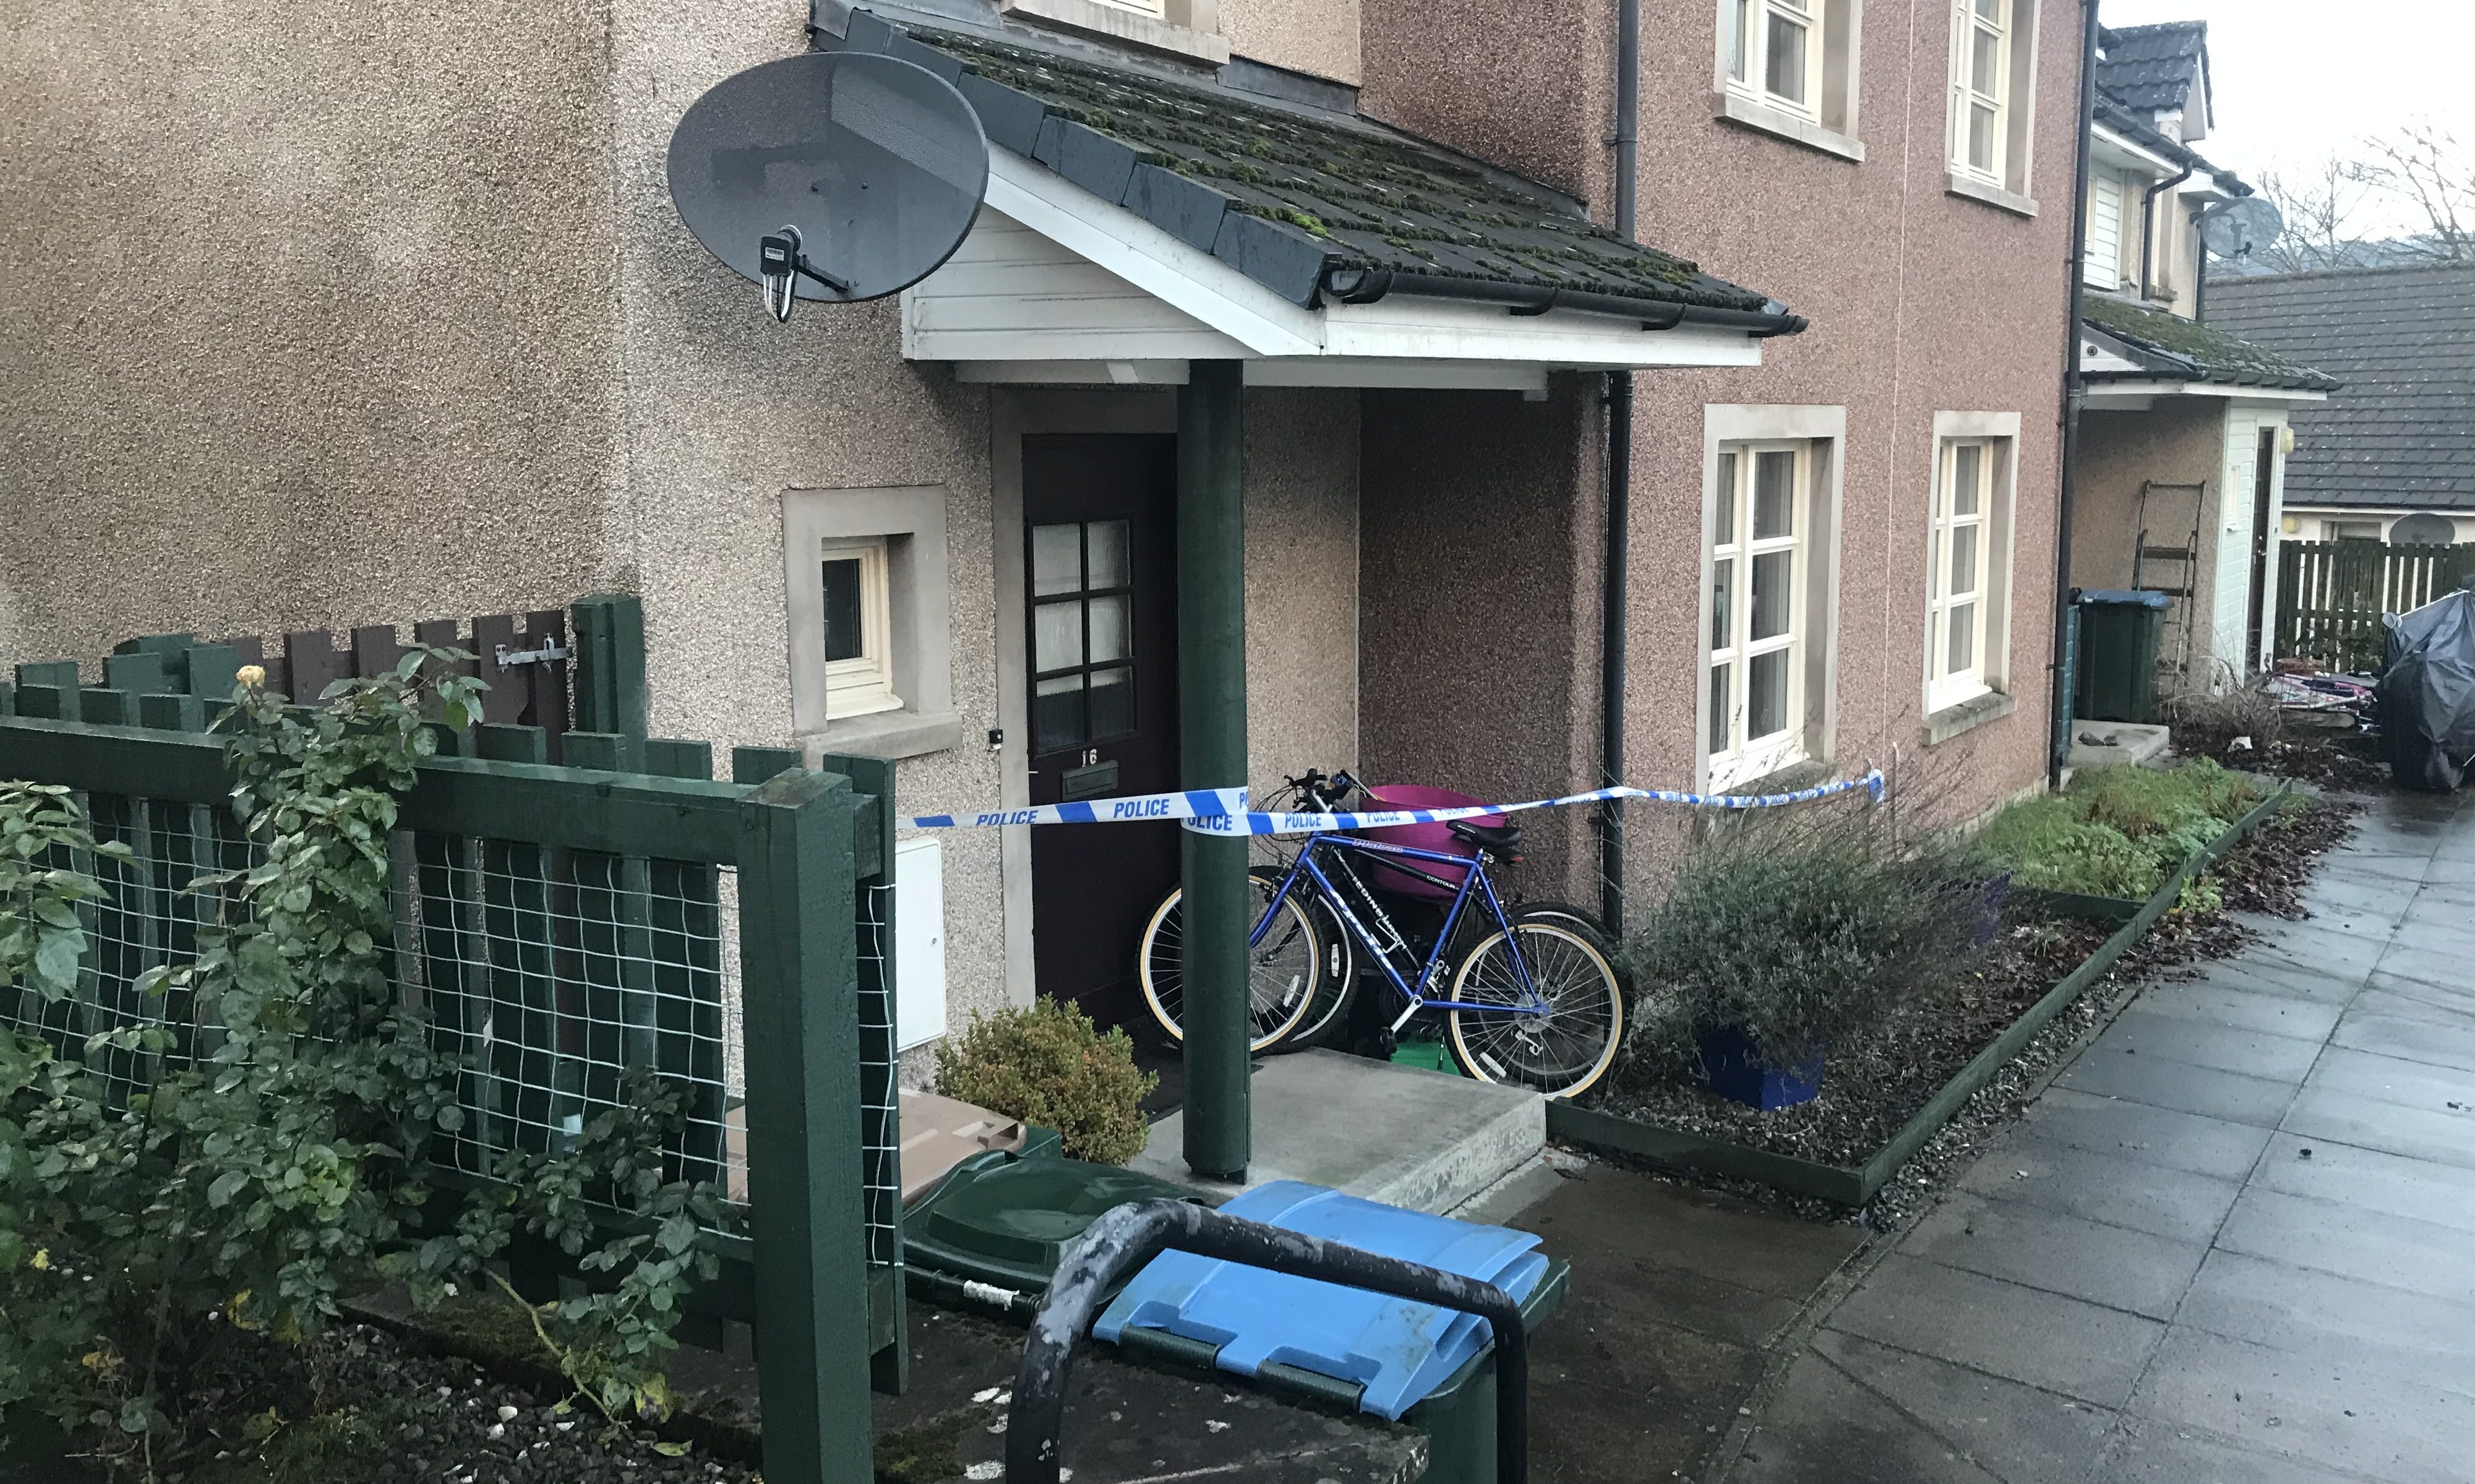 The Crieff property was sealed off by police.